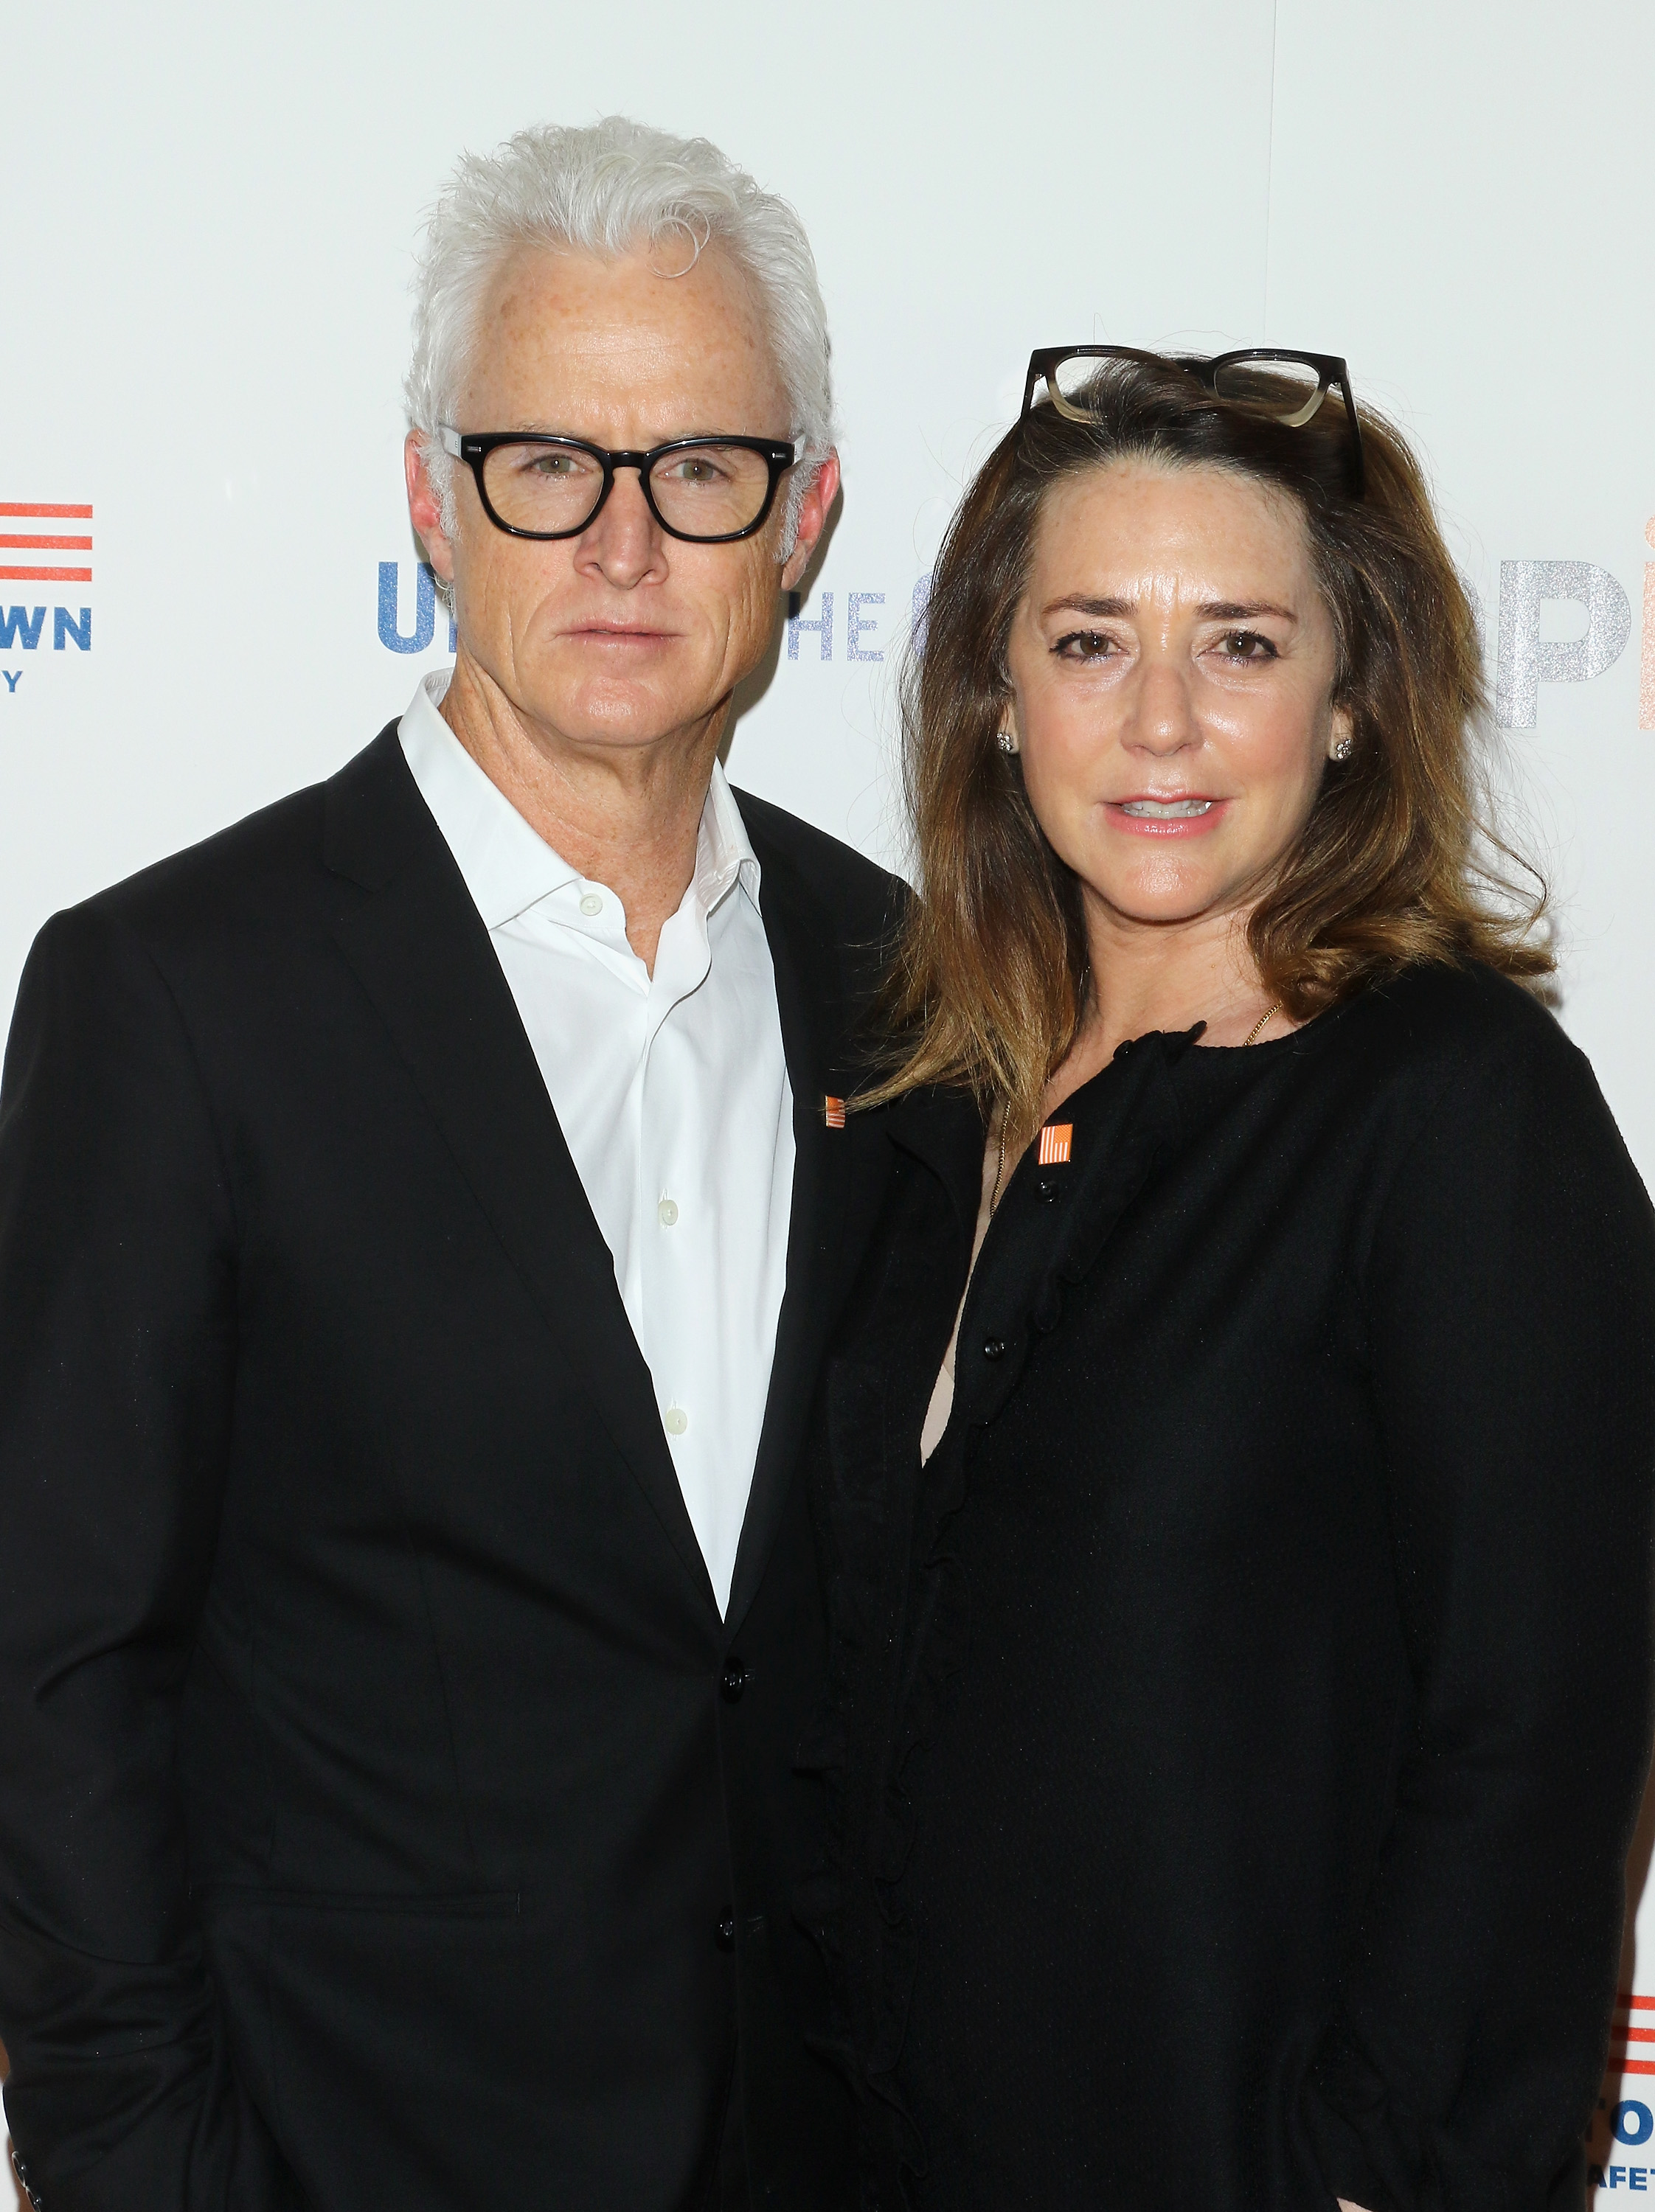 Talia Balsam and John Slattery at the premiere of "Under The Gun" in New York City on May 12, 2016 | Source: Getty Images